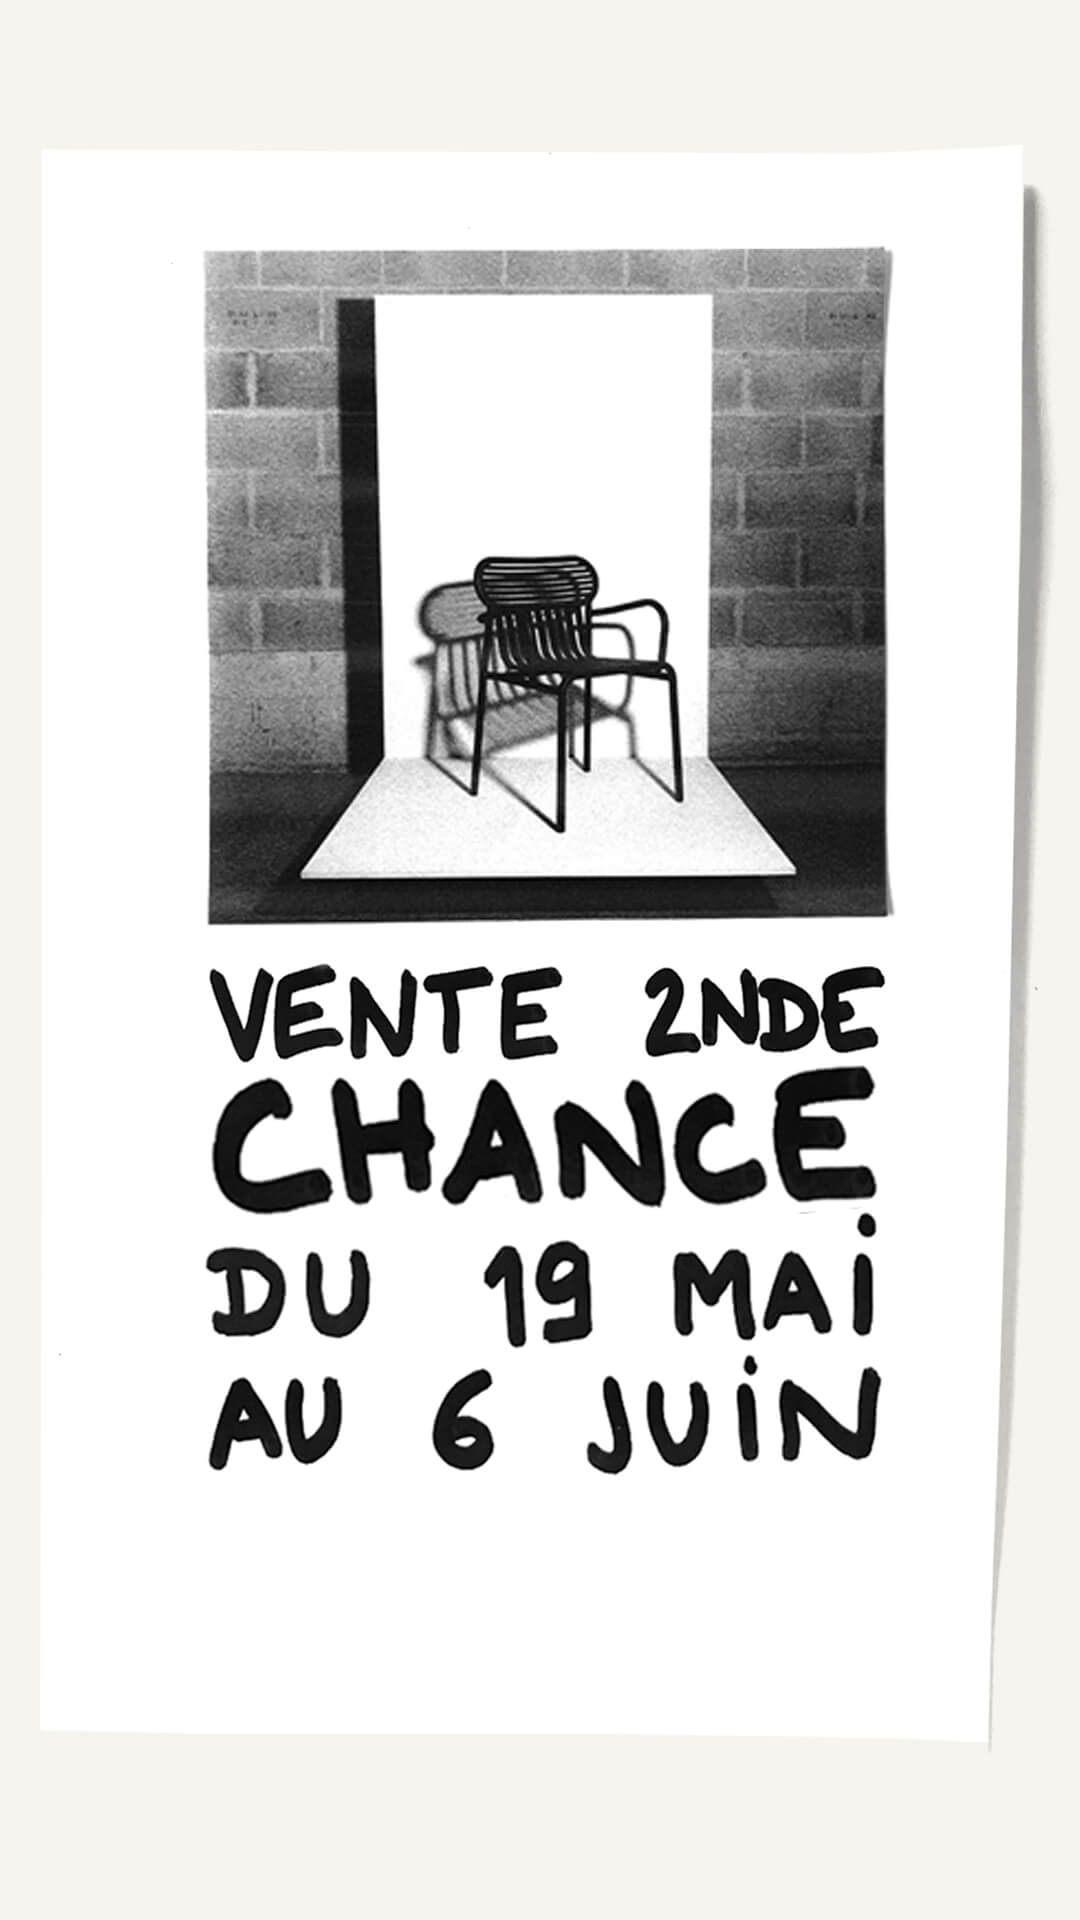 2nde Chance - Vente exceptionnelle - Petite Friture